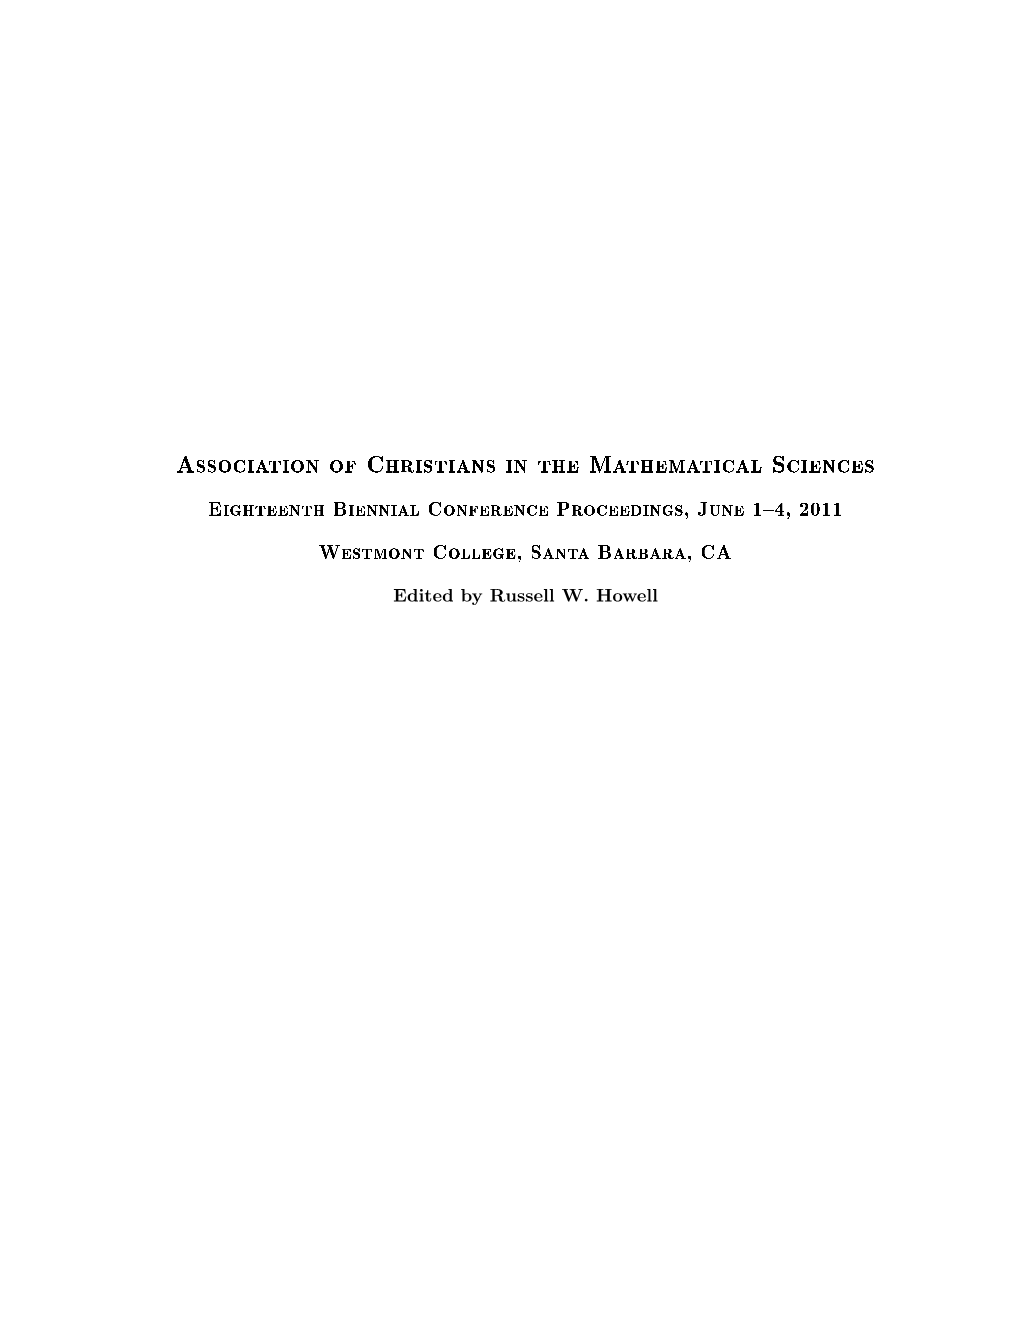 Proceedings of the 2011 ACMS Conference